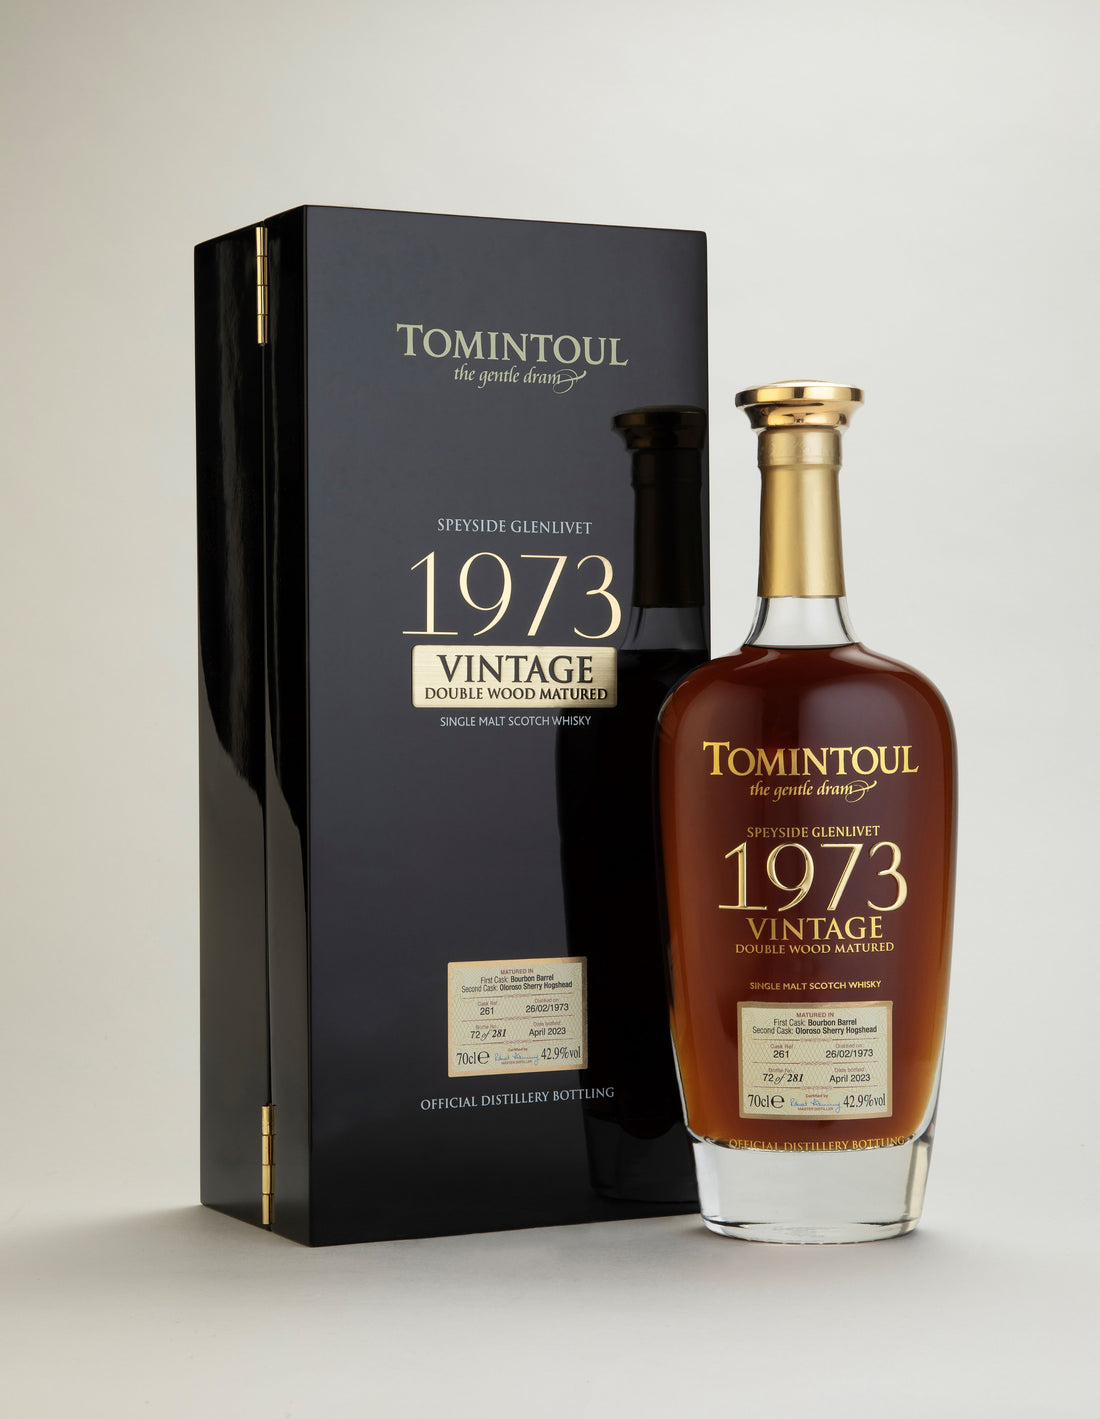 Rare 50-year-old bottle of whisky from Tomintoul distillery released